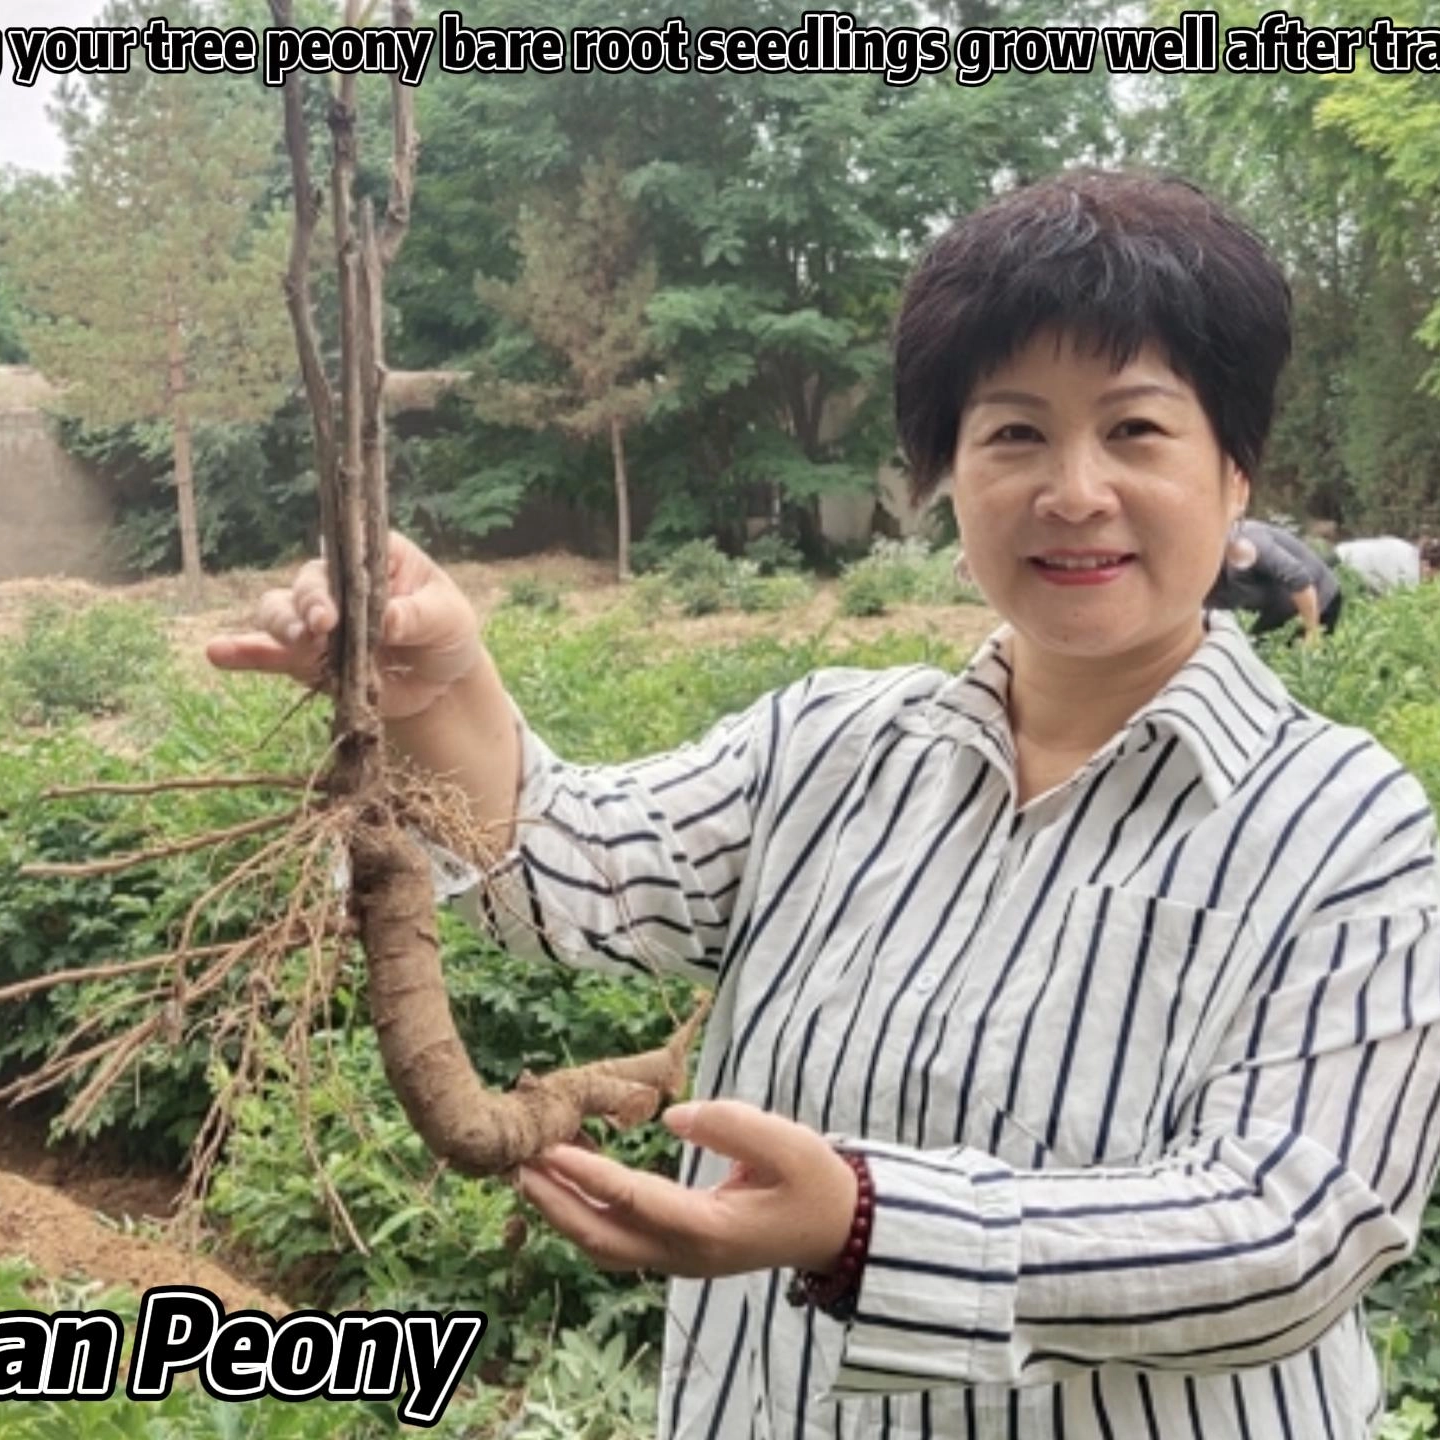 The Key To Making Your Tree Peony Bare Root Seedlings Grow Well After Transplanting!